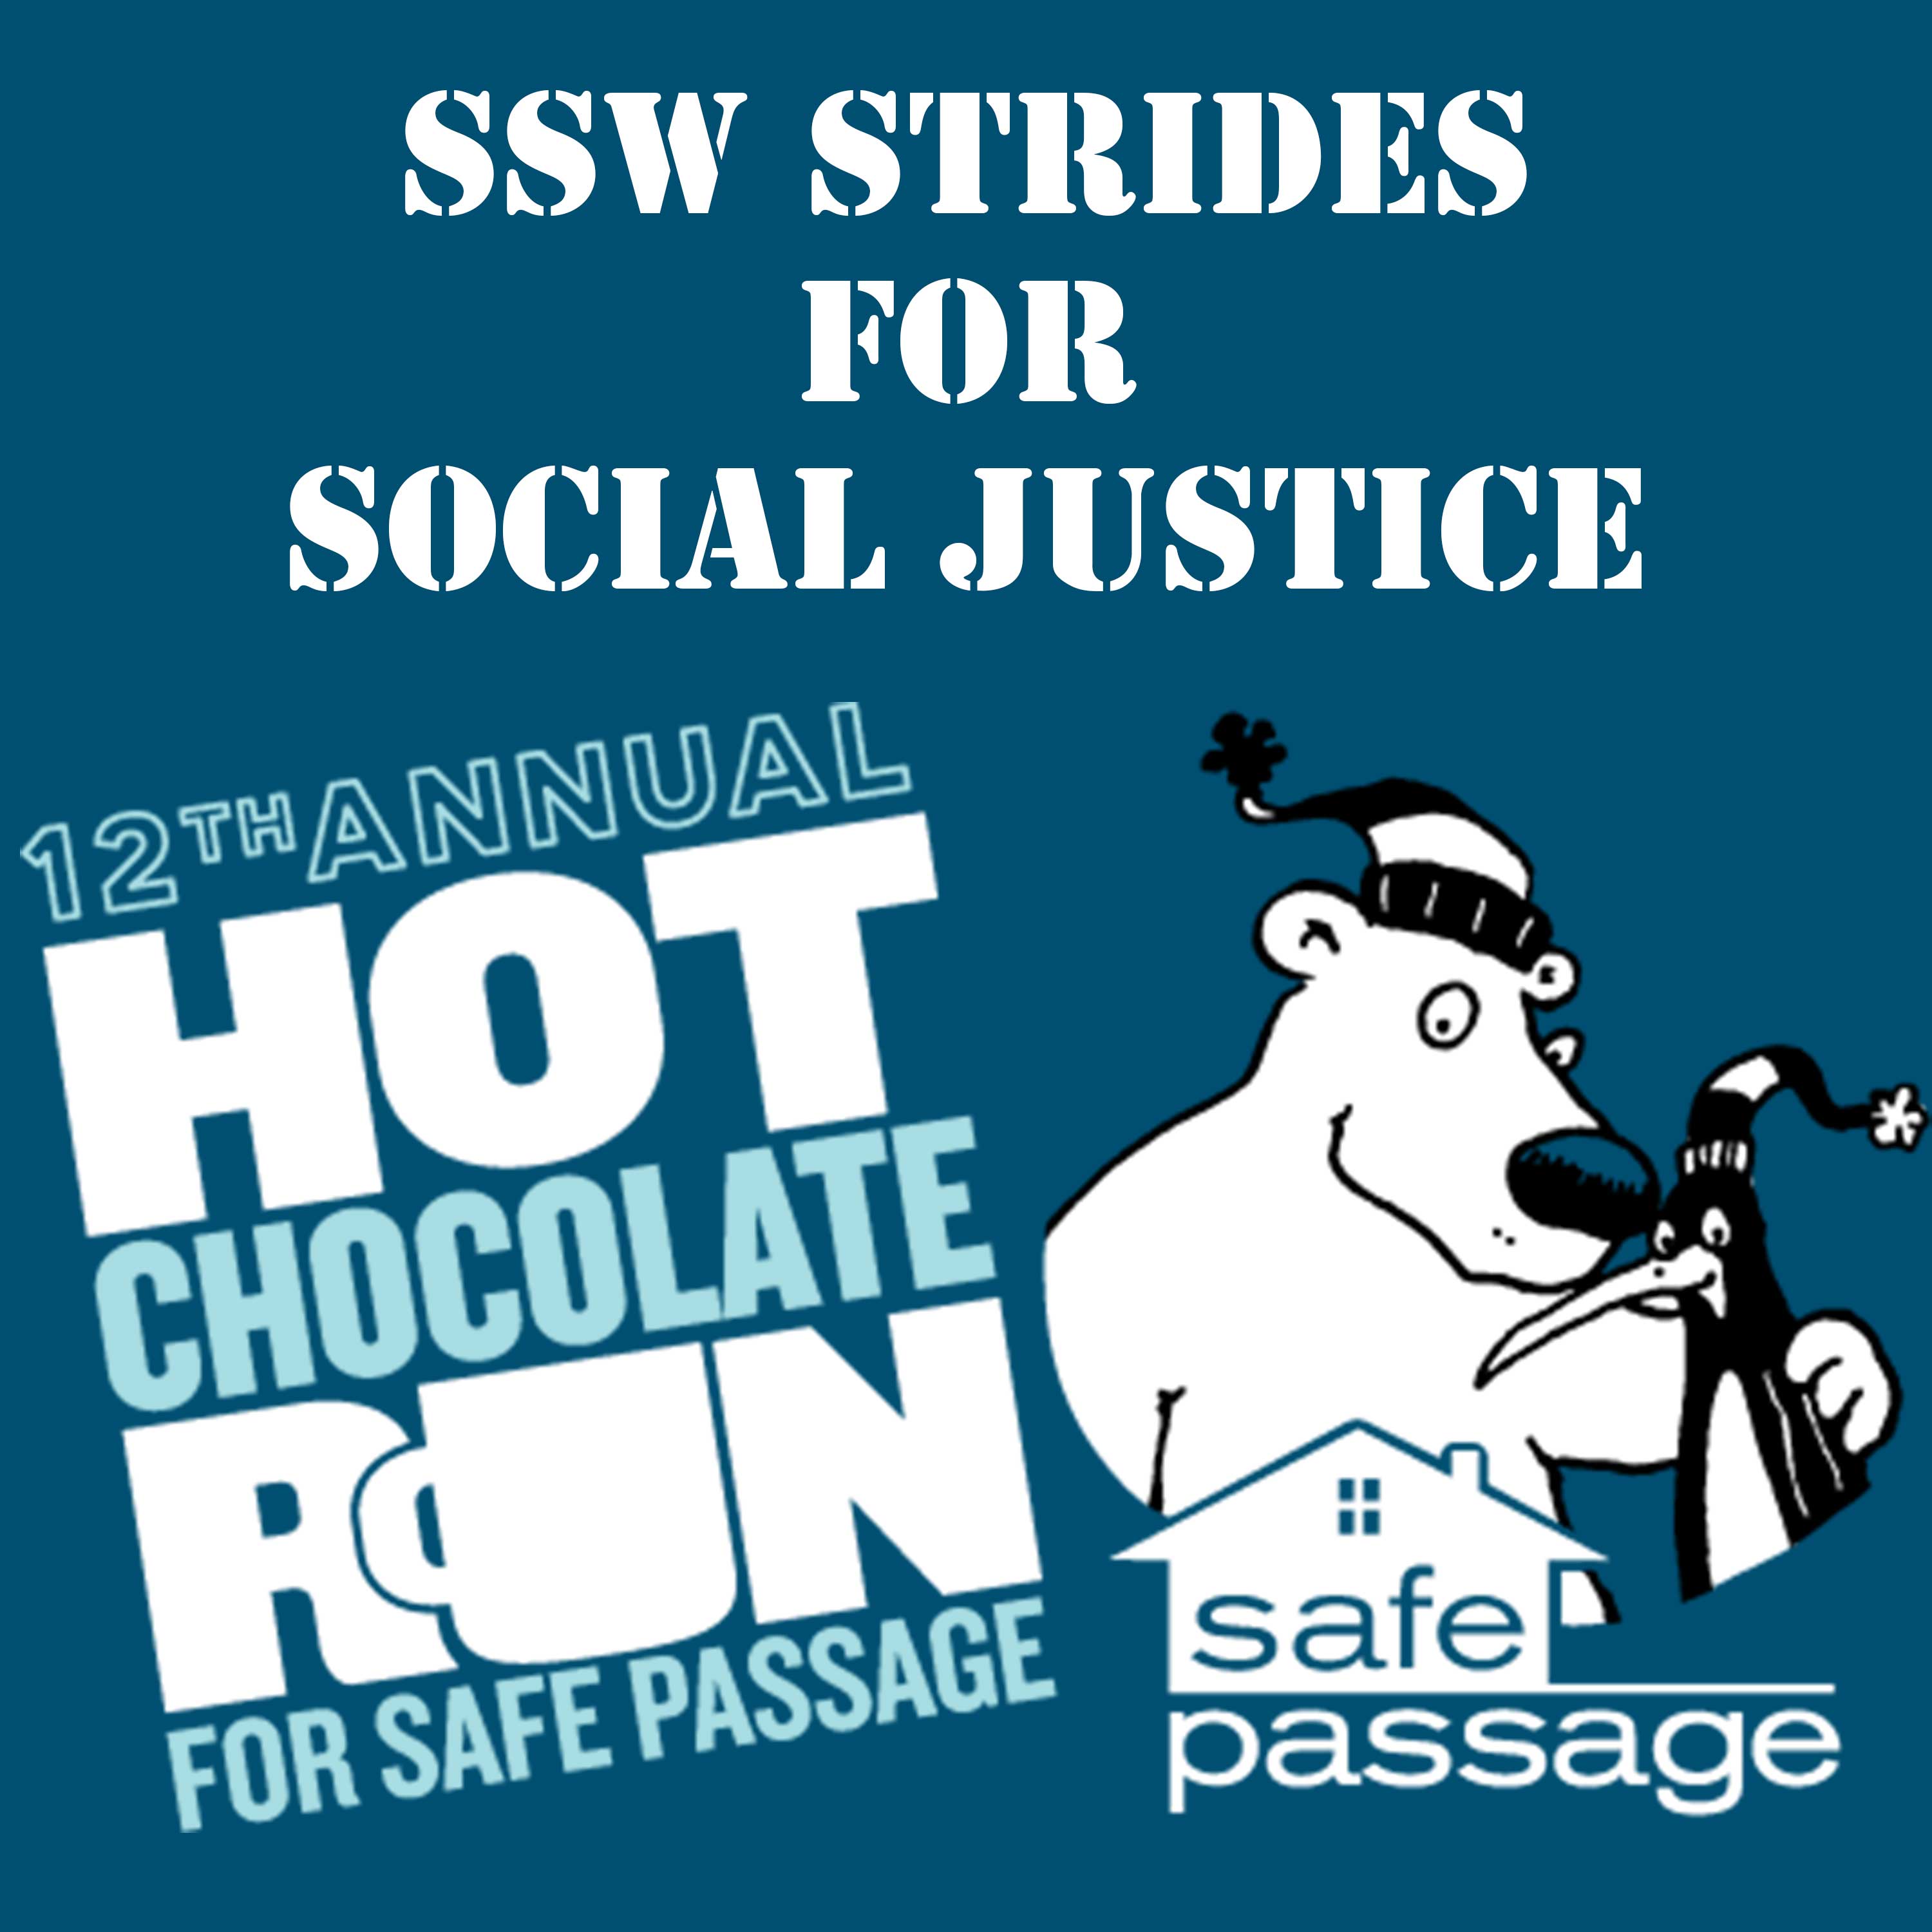 SSW Strides for Social Justice in the 12th Annual Hot Chocolate Run!